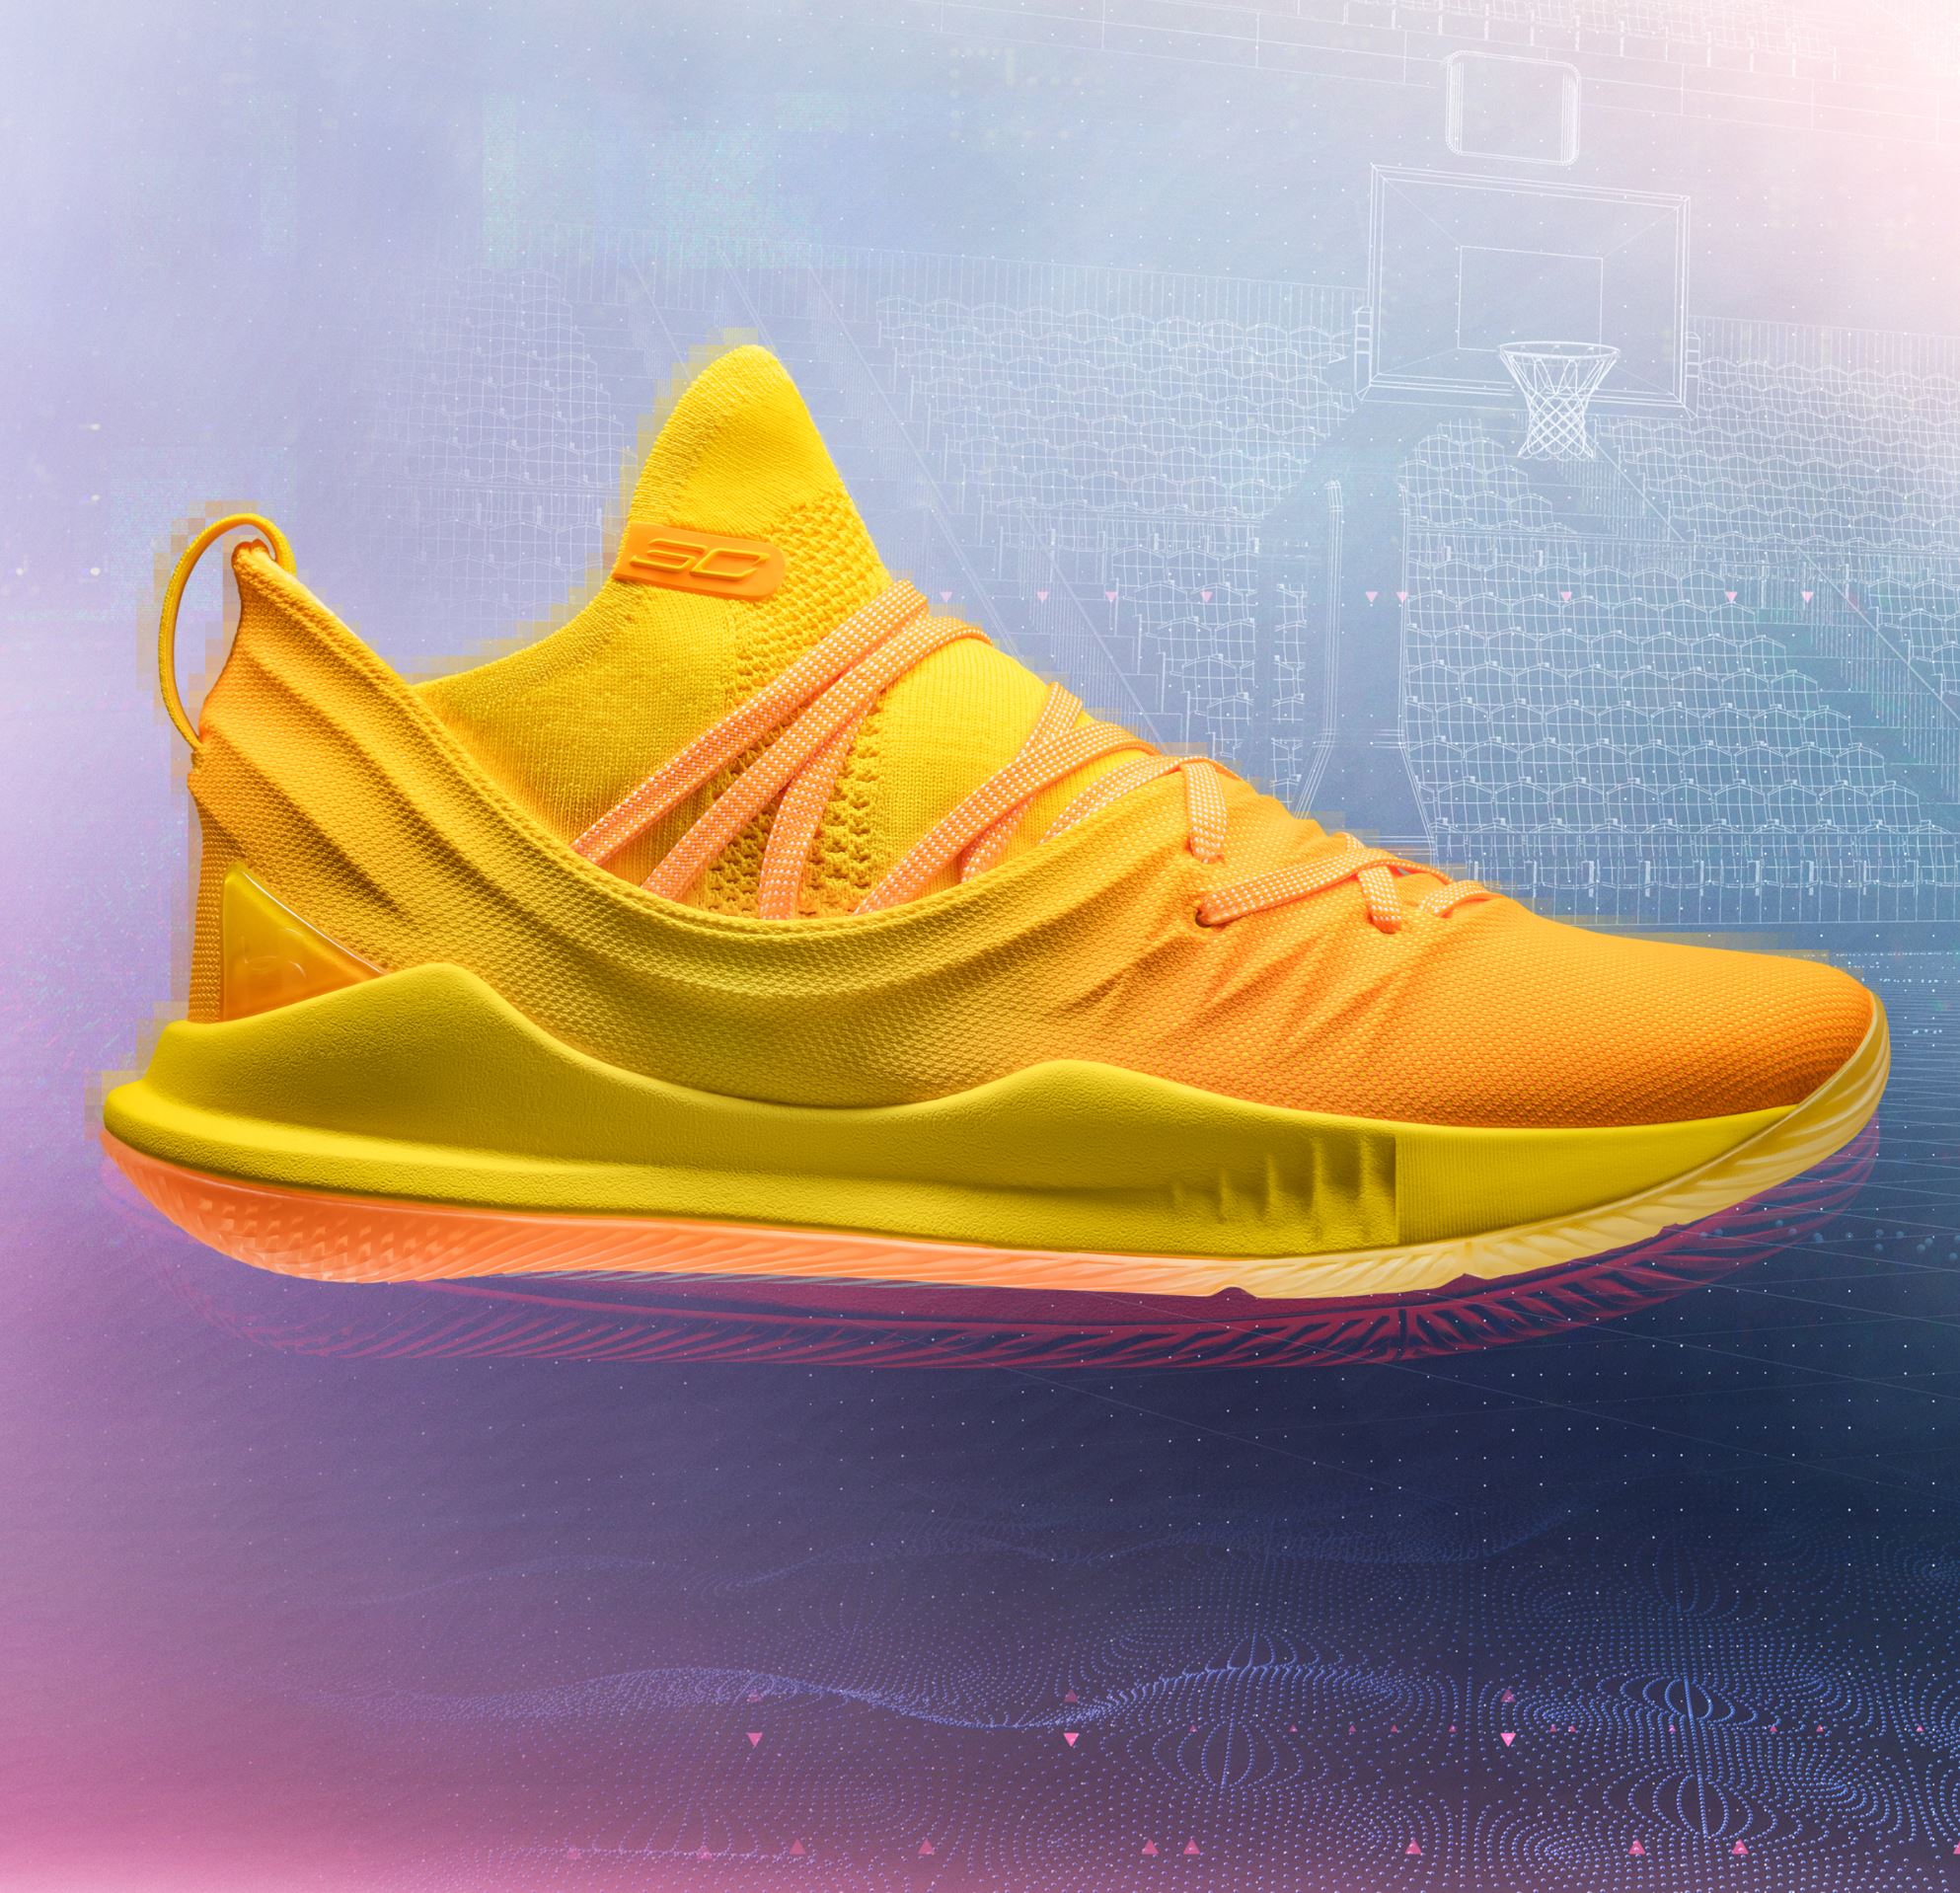 under armour curry 5 yellow 2018 Stephen Curry Asia Tour